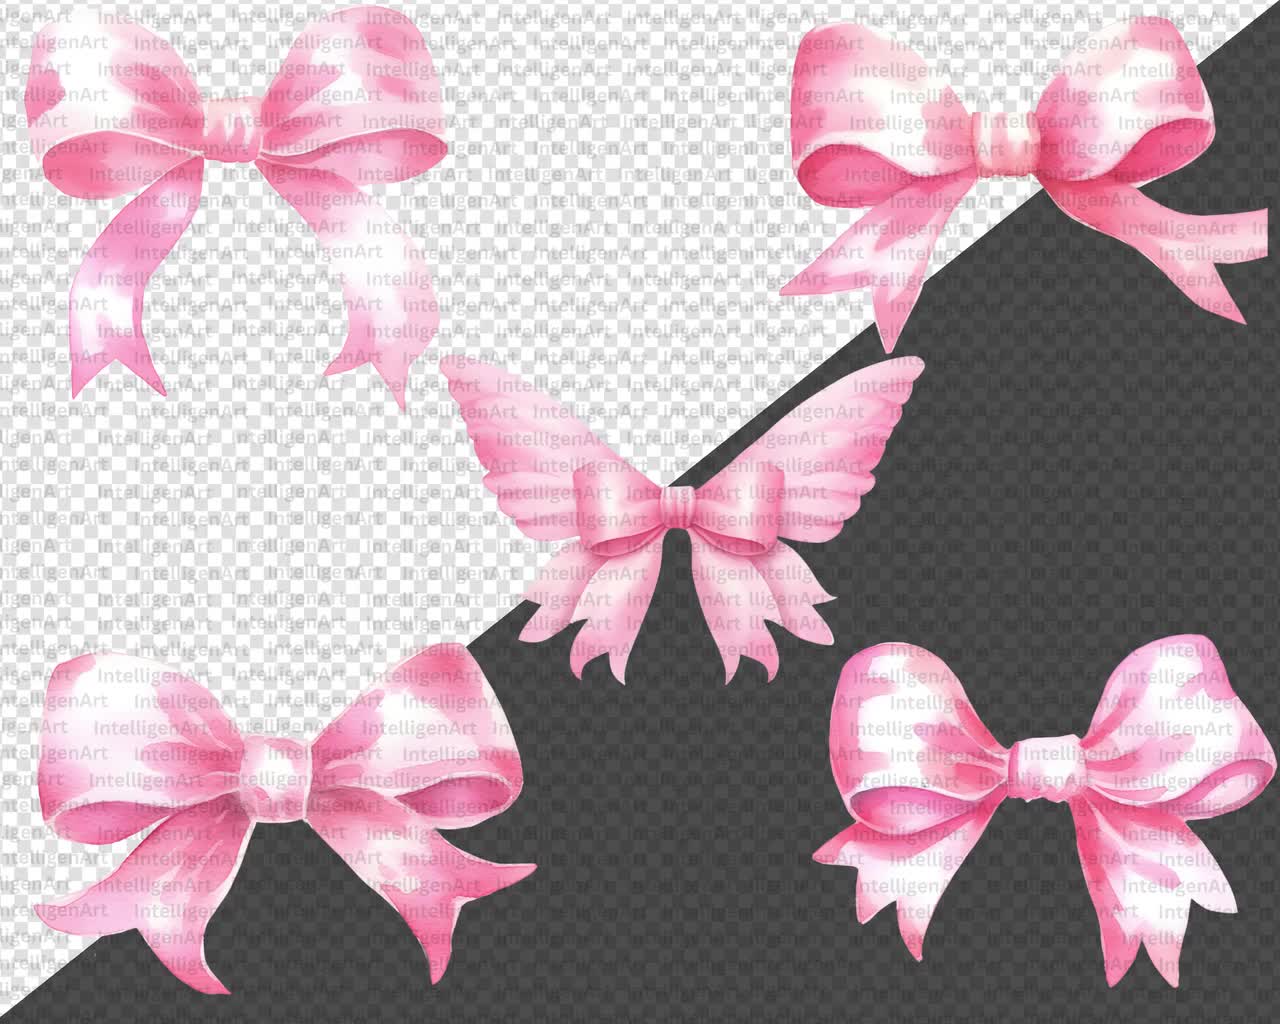 Decoration Ribbon Cute Ribbon, Pink, Bow Tie, Wing transparent background  PNG clipart